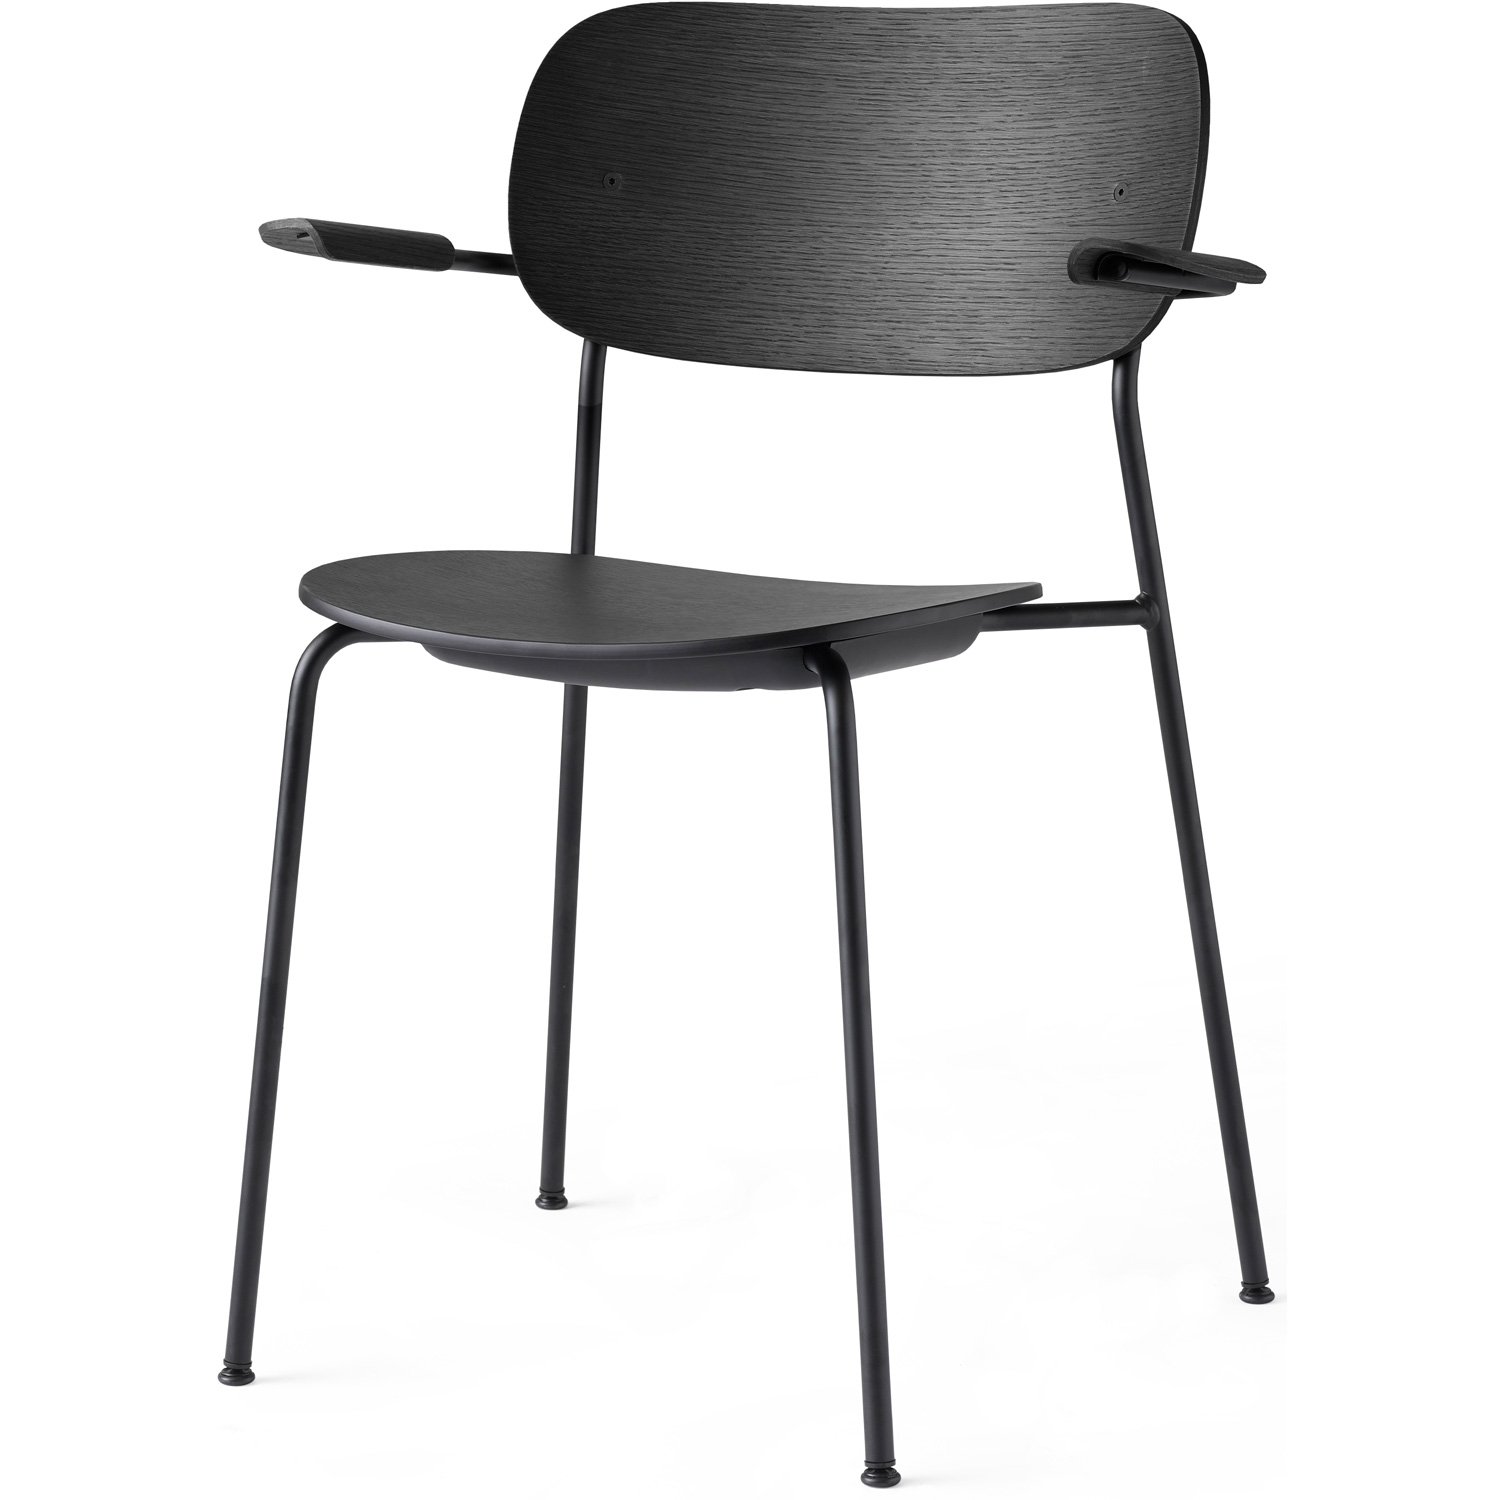 Co Chair Dining Chair Black, Black Oak Seat w/Arms